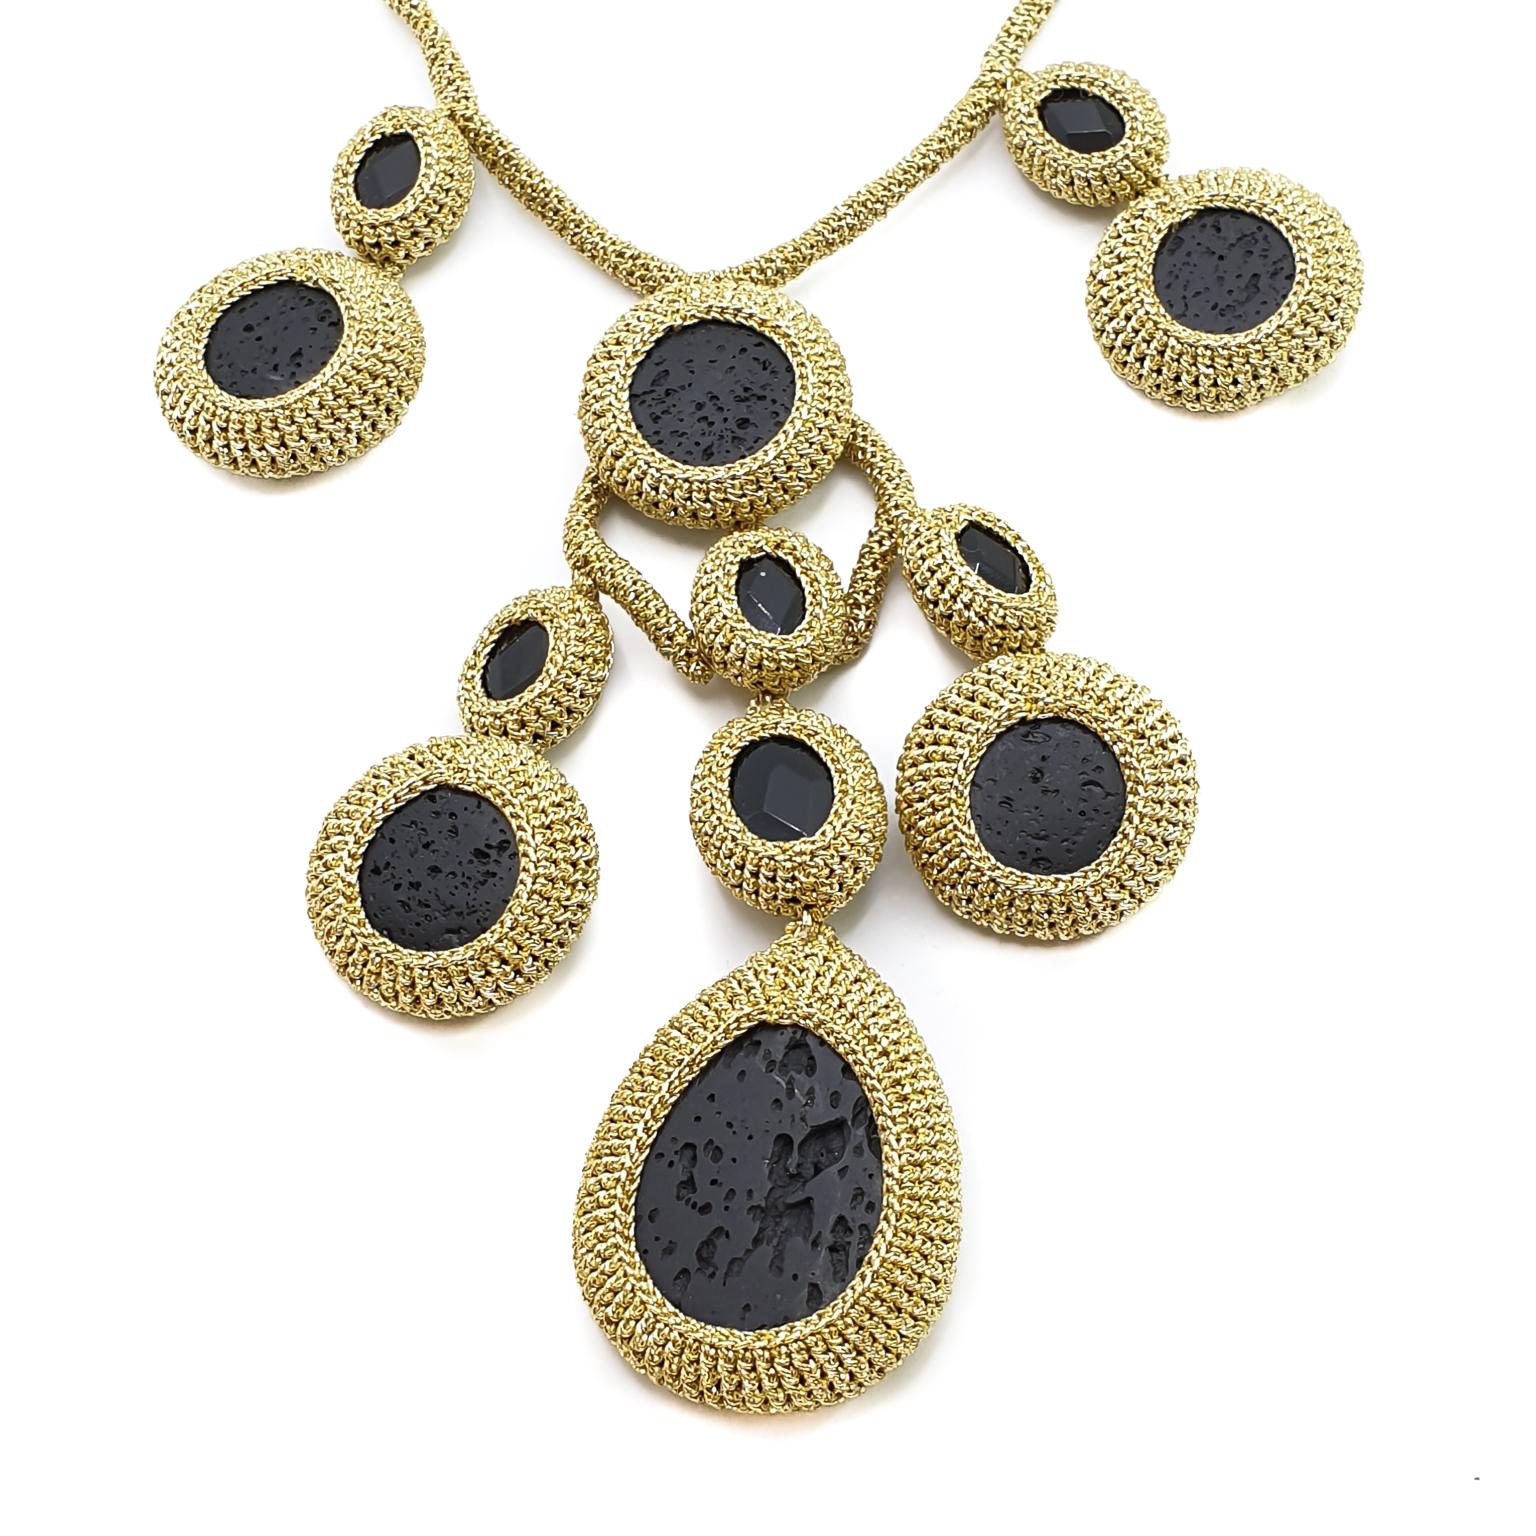 This is a one of kind statement necklace suitable for everyday and evening wear. The necklace is crochet with a golden smooth passing, none tarnishable thread, hand crochet with large natural black Lava stones